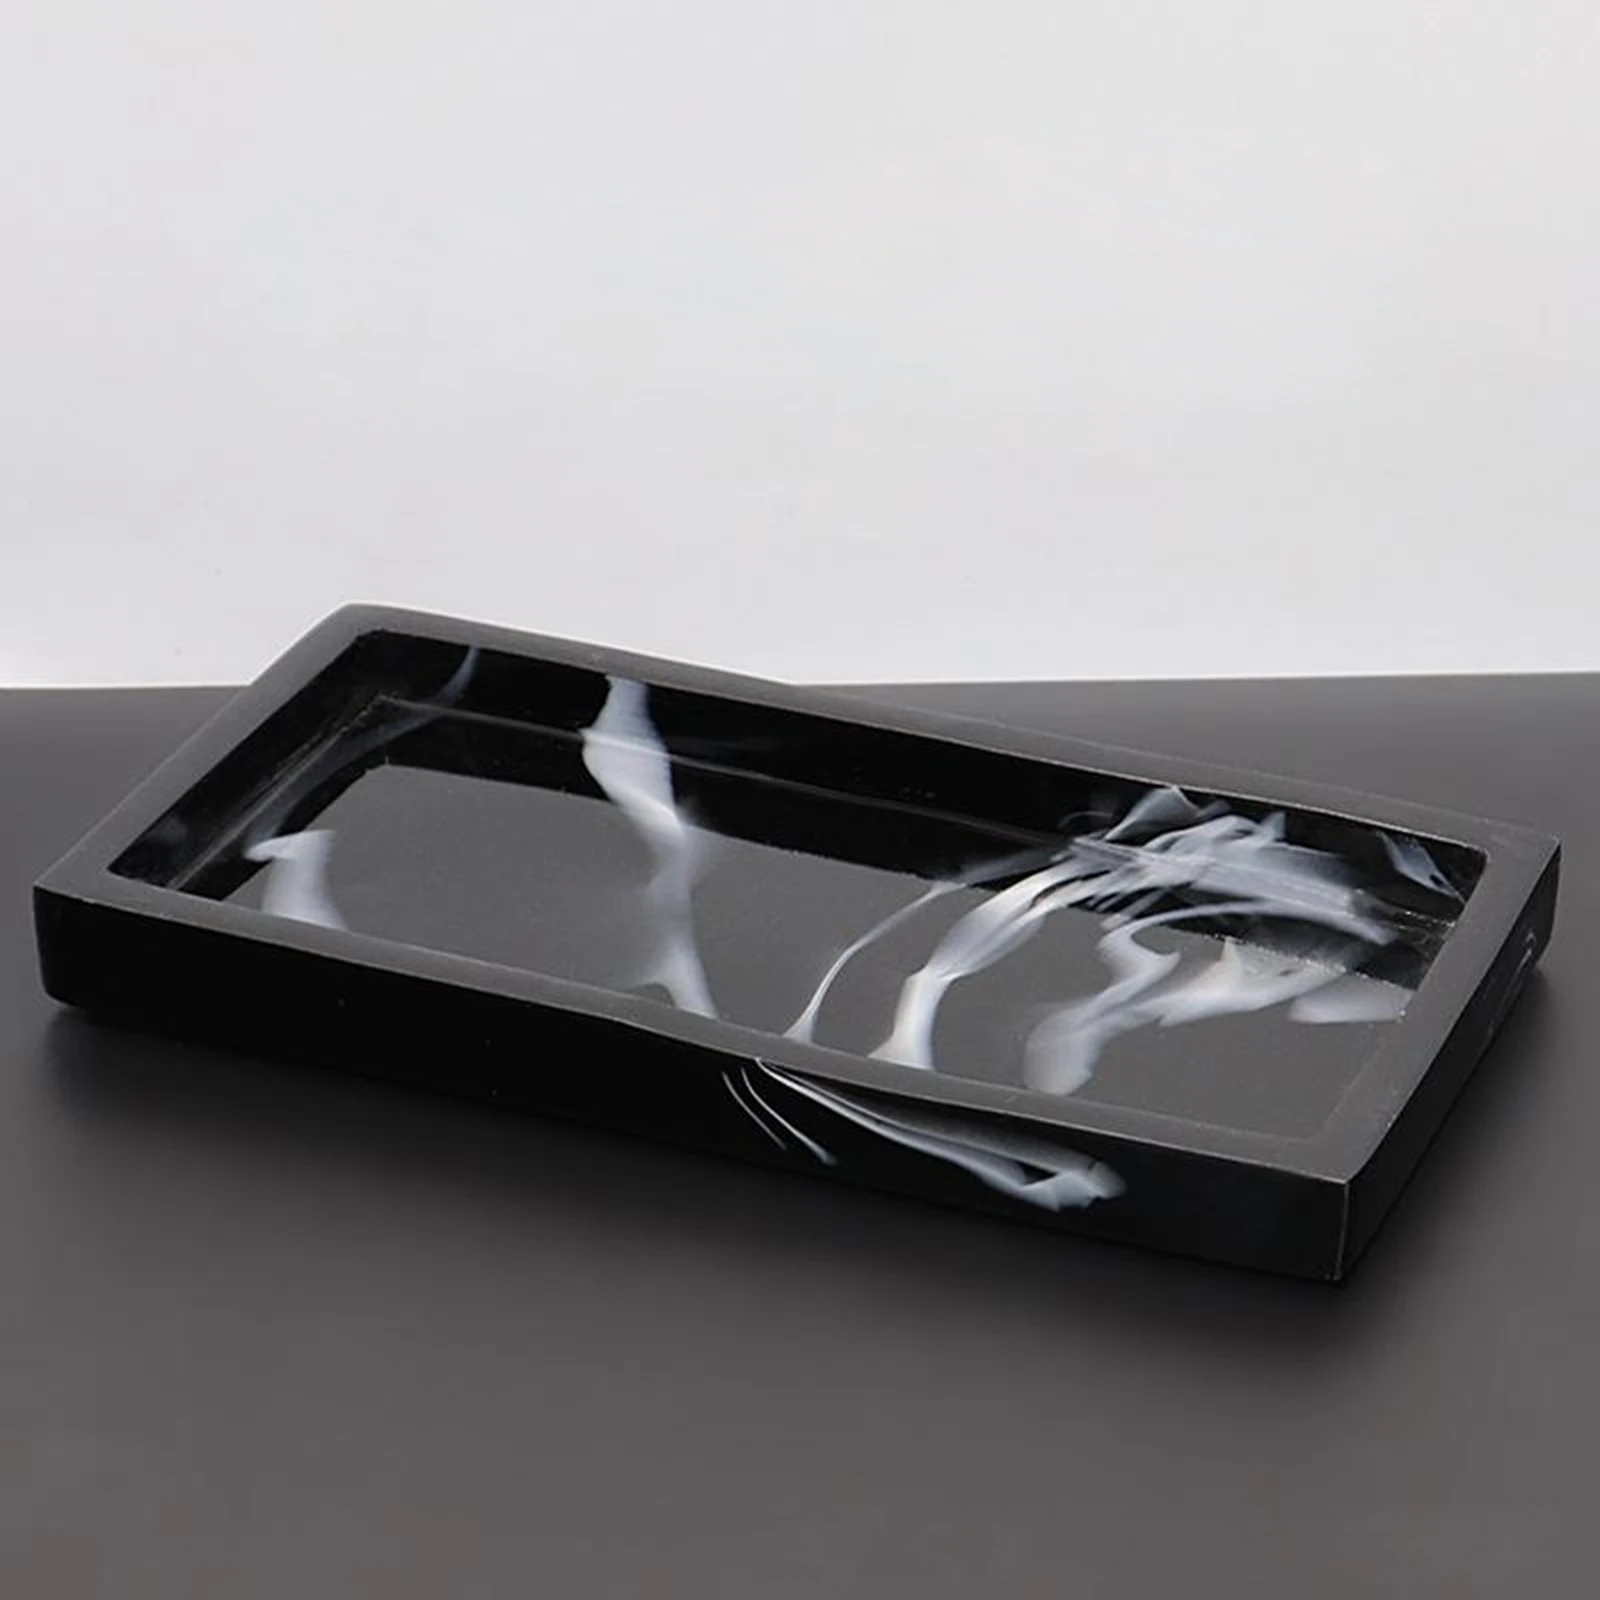 Luxury Marble Print Resin Bathtub Serving Tray Dish for Tissues Soap Perfume